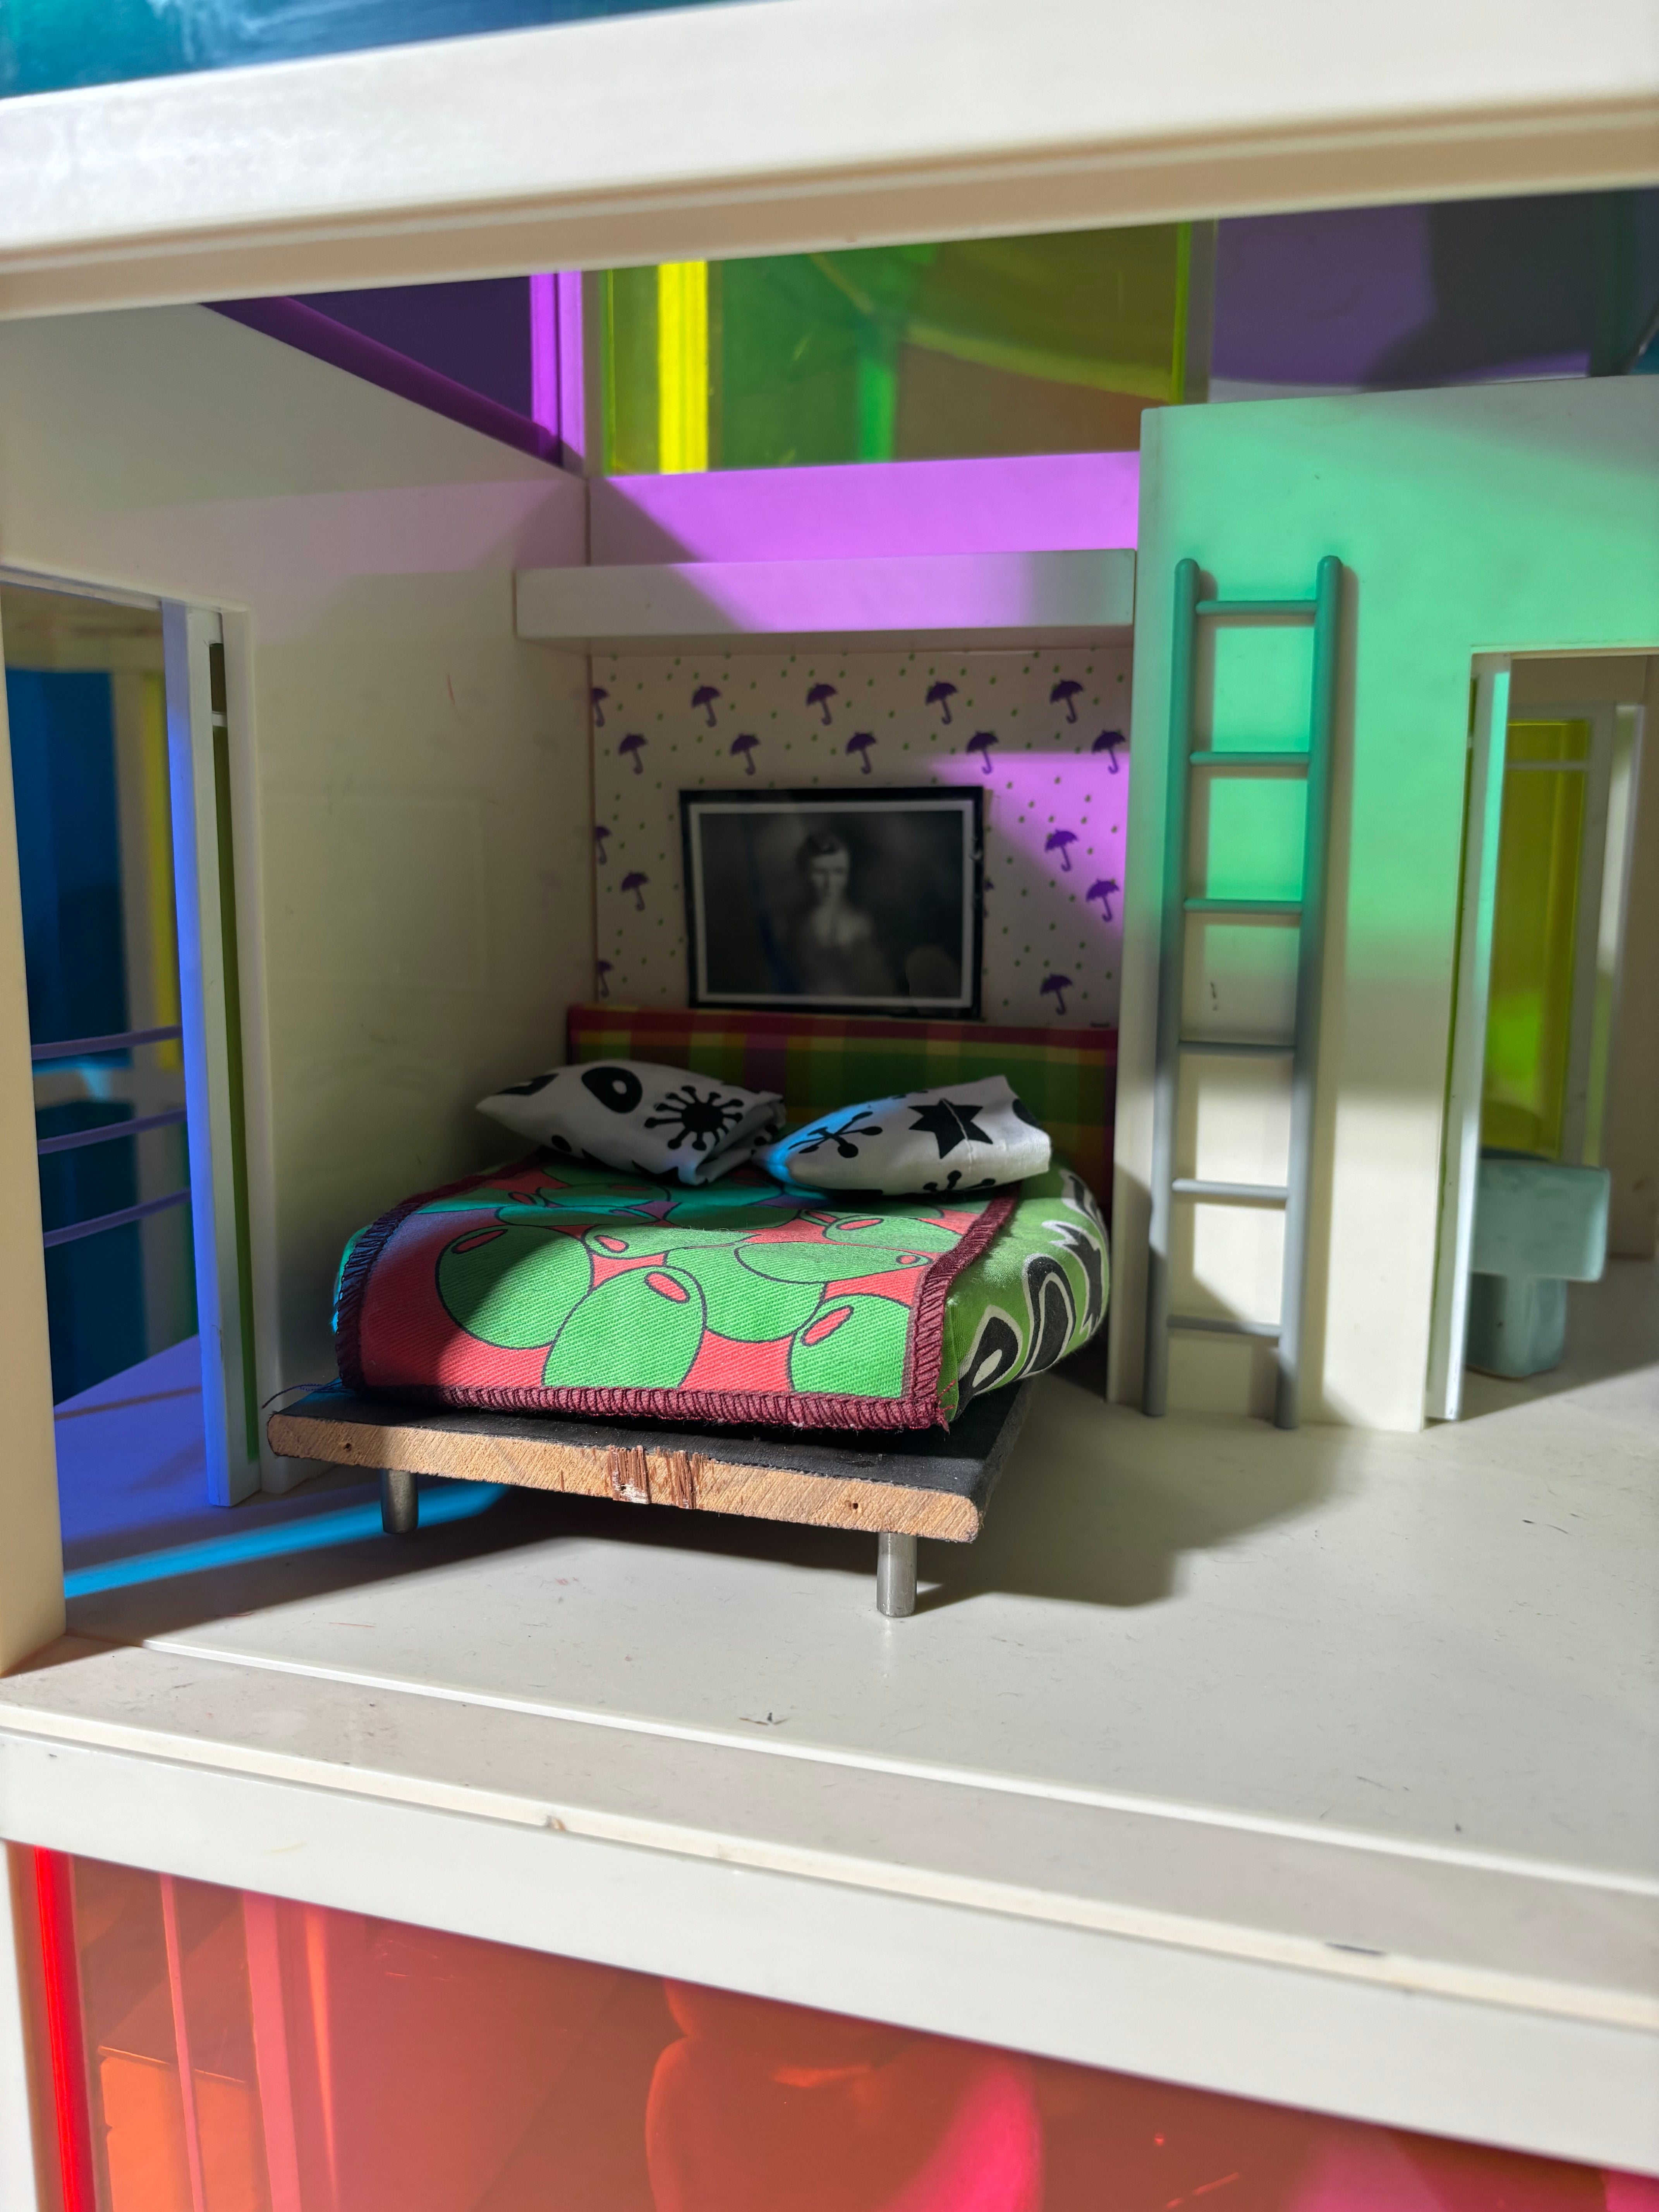 Kaleidoscope Modernist House by Laurie Simmons & Wheelwhright Peter